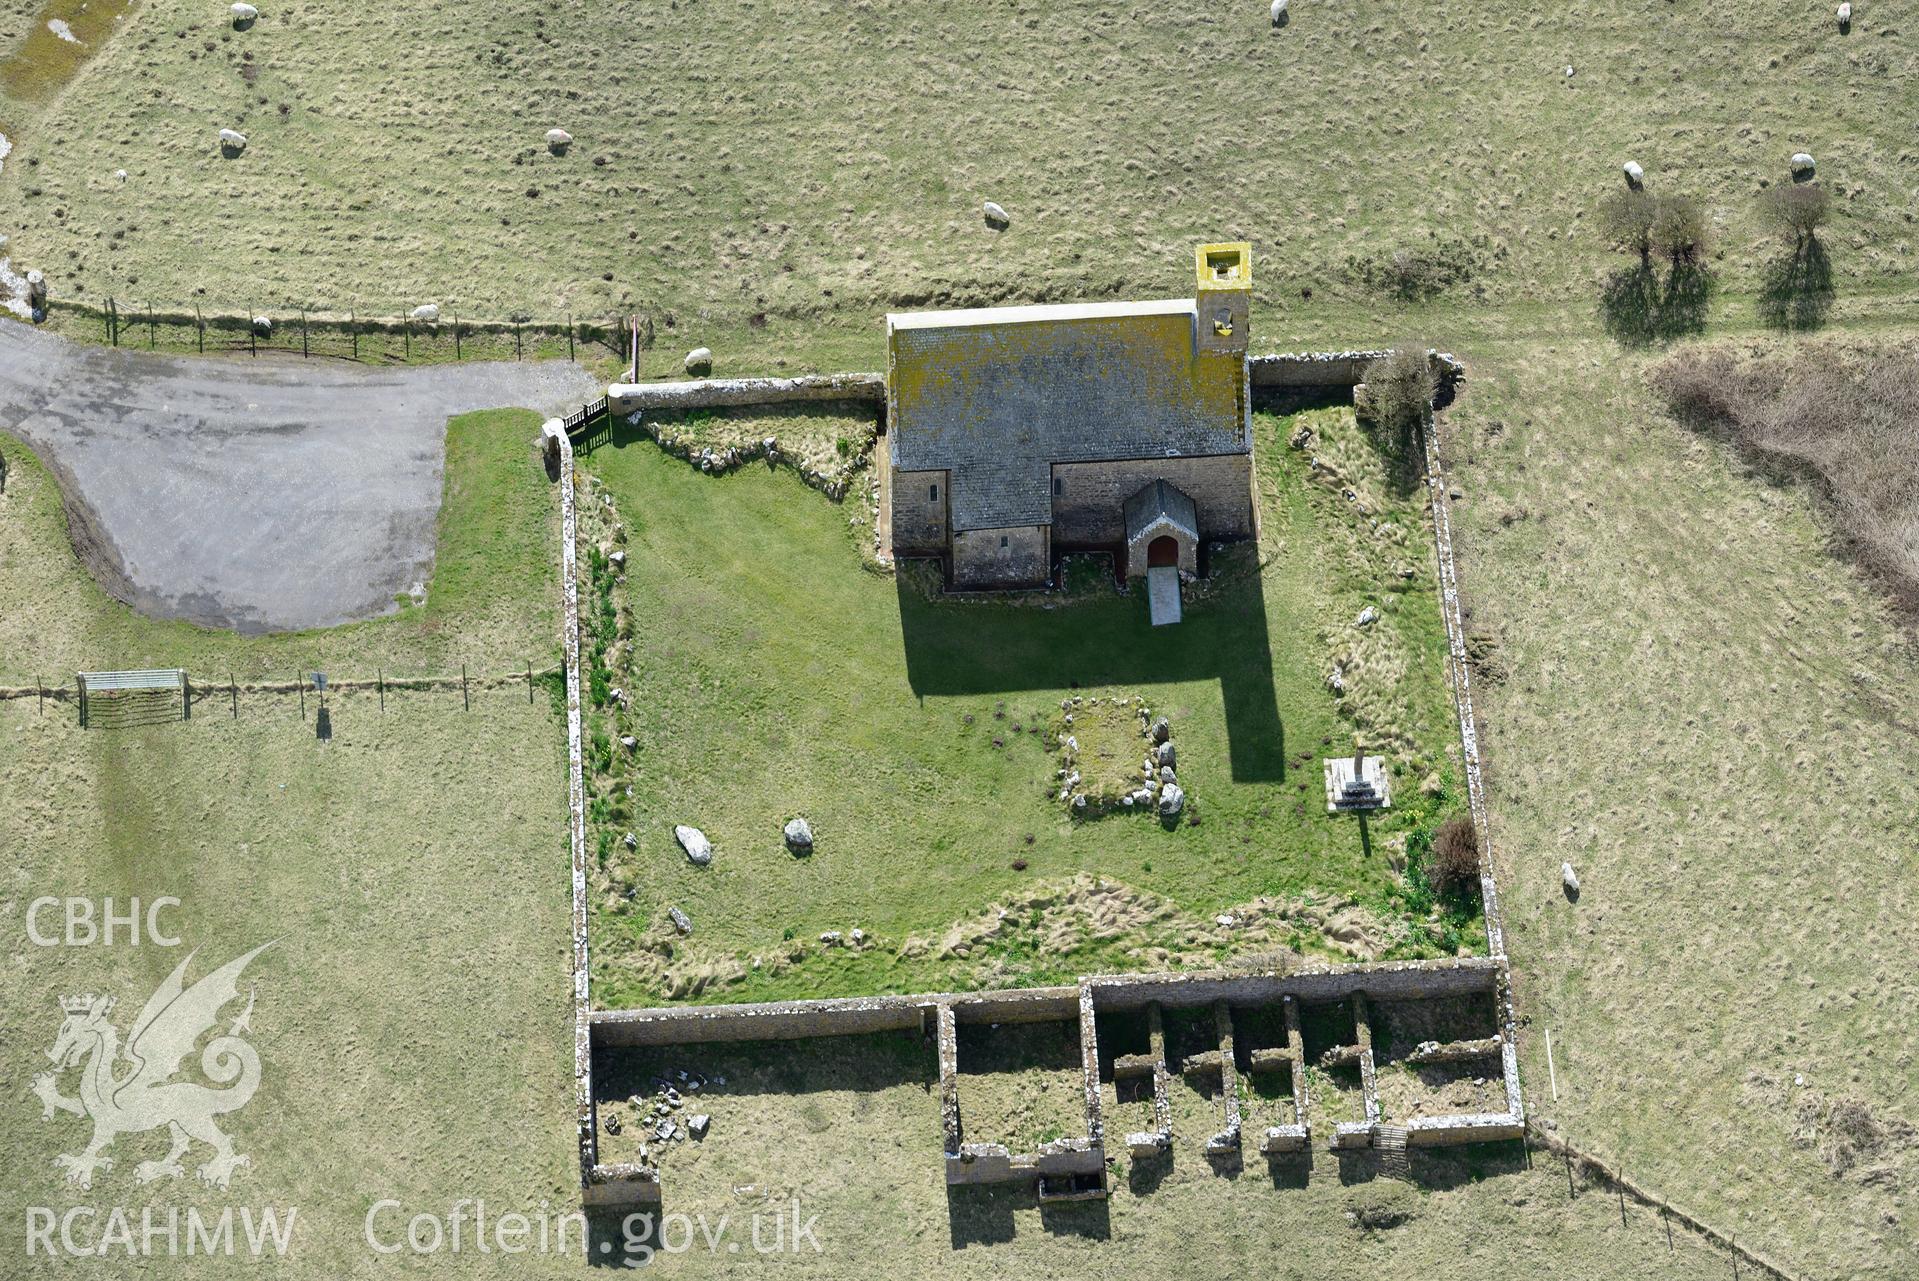 St Martin's, Flimston Chapel. Baseline aerial reconnaissance survey for the CHERISH Project. ? Crown: CHERISH PROJECT 2018. Produced with EU funds through the Ireland Wales Co-operation Programme 2014-2020. All material made freely available through the Open Government Licence.